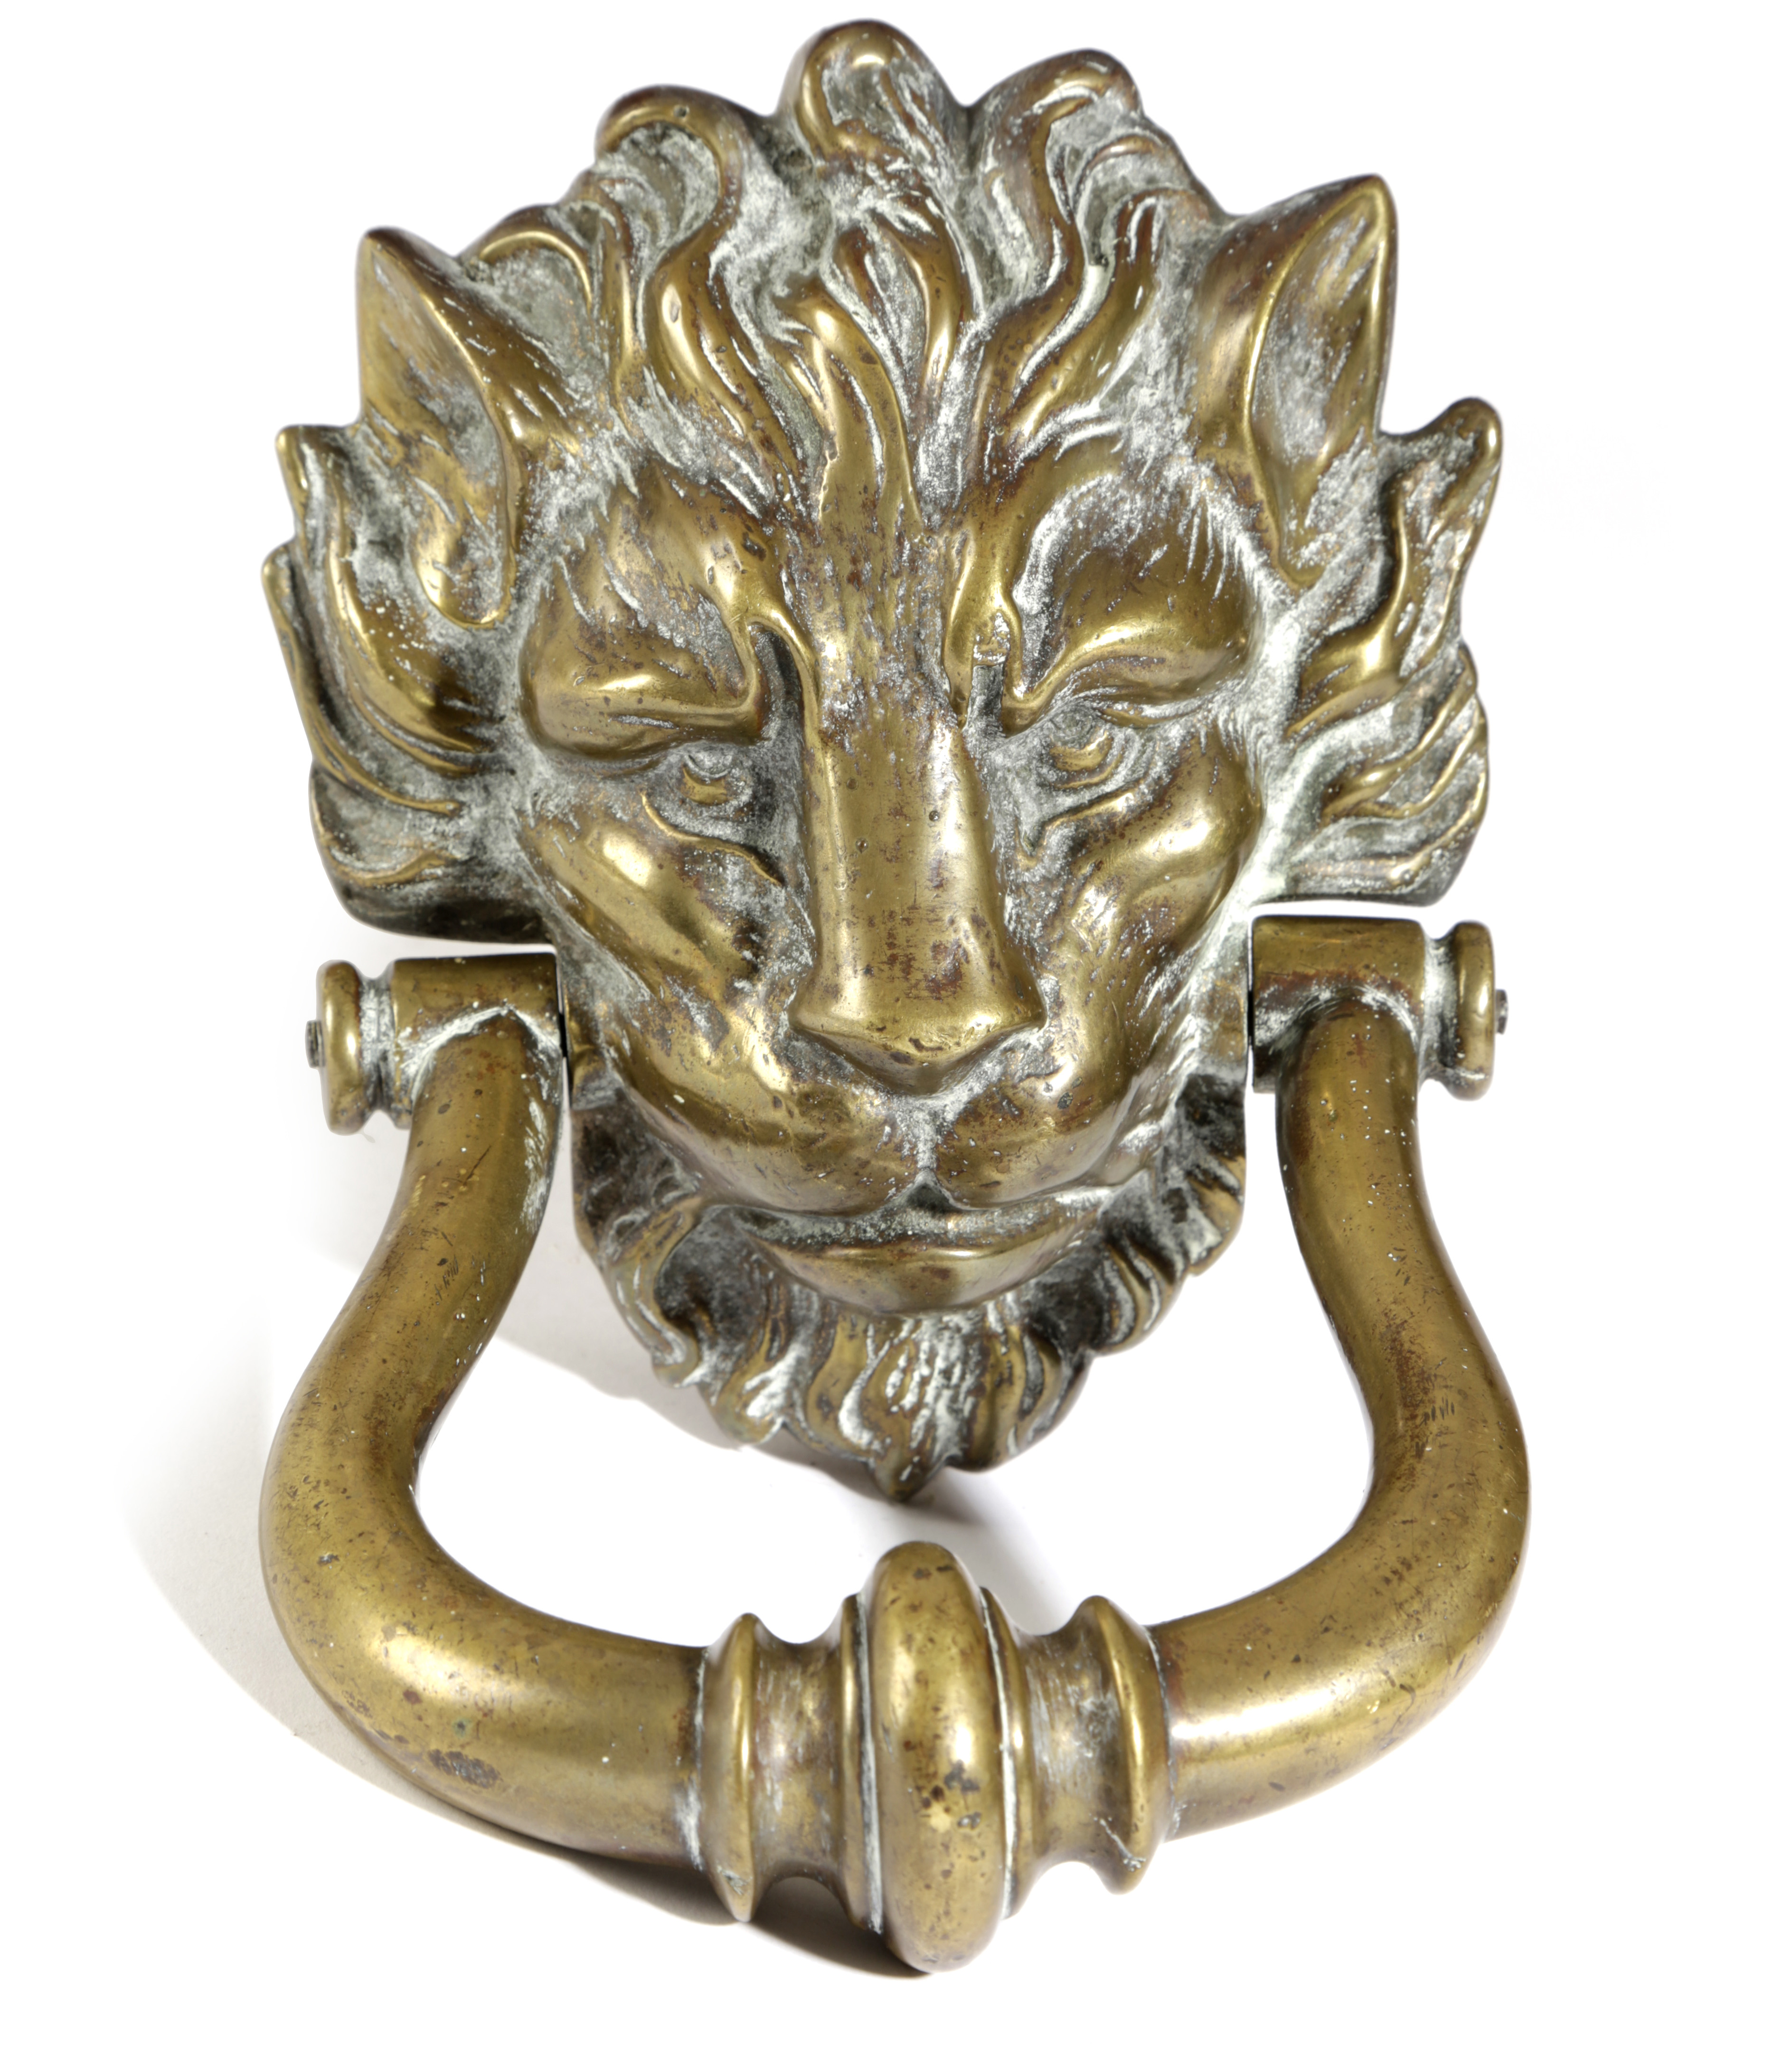 A BRASS DOOR KNOCKER MID-19TH CENTURY in the form of a lion's mask 24.5cm high, 14cm wide